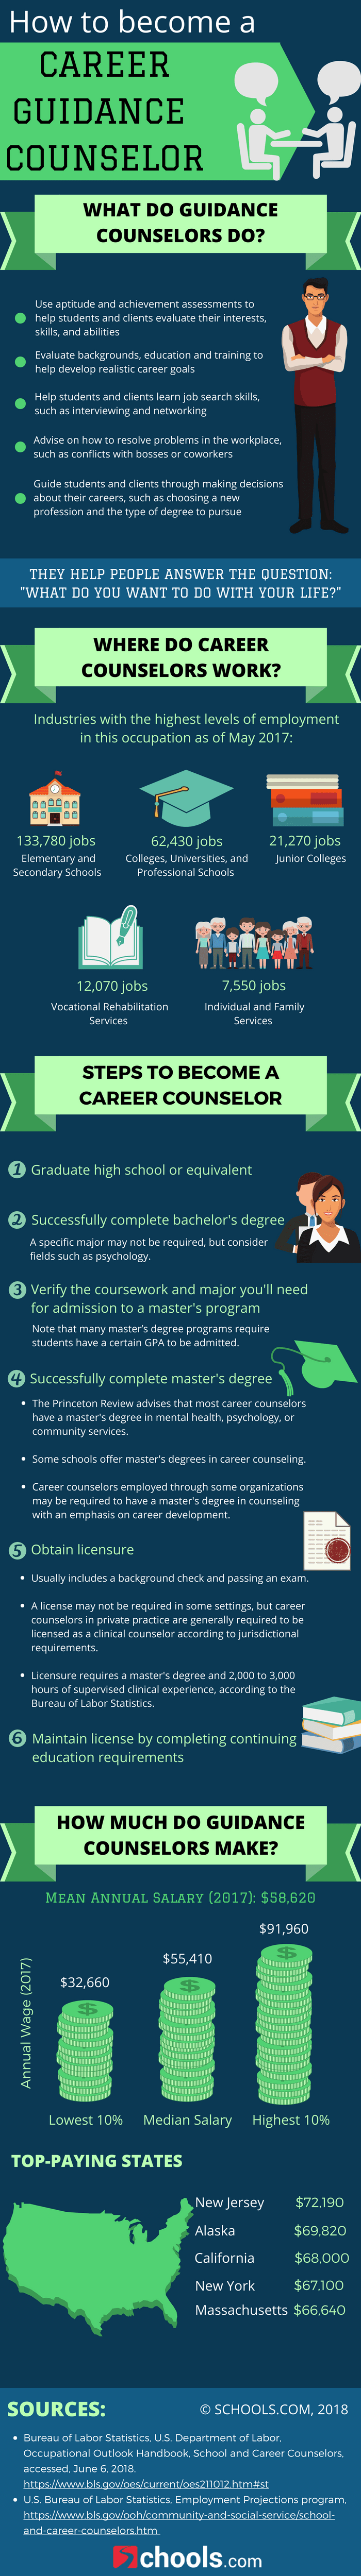 how to become a career guidance counselor